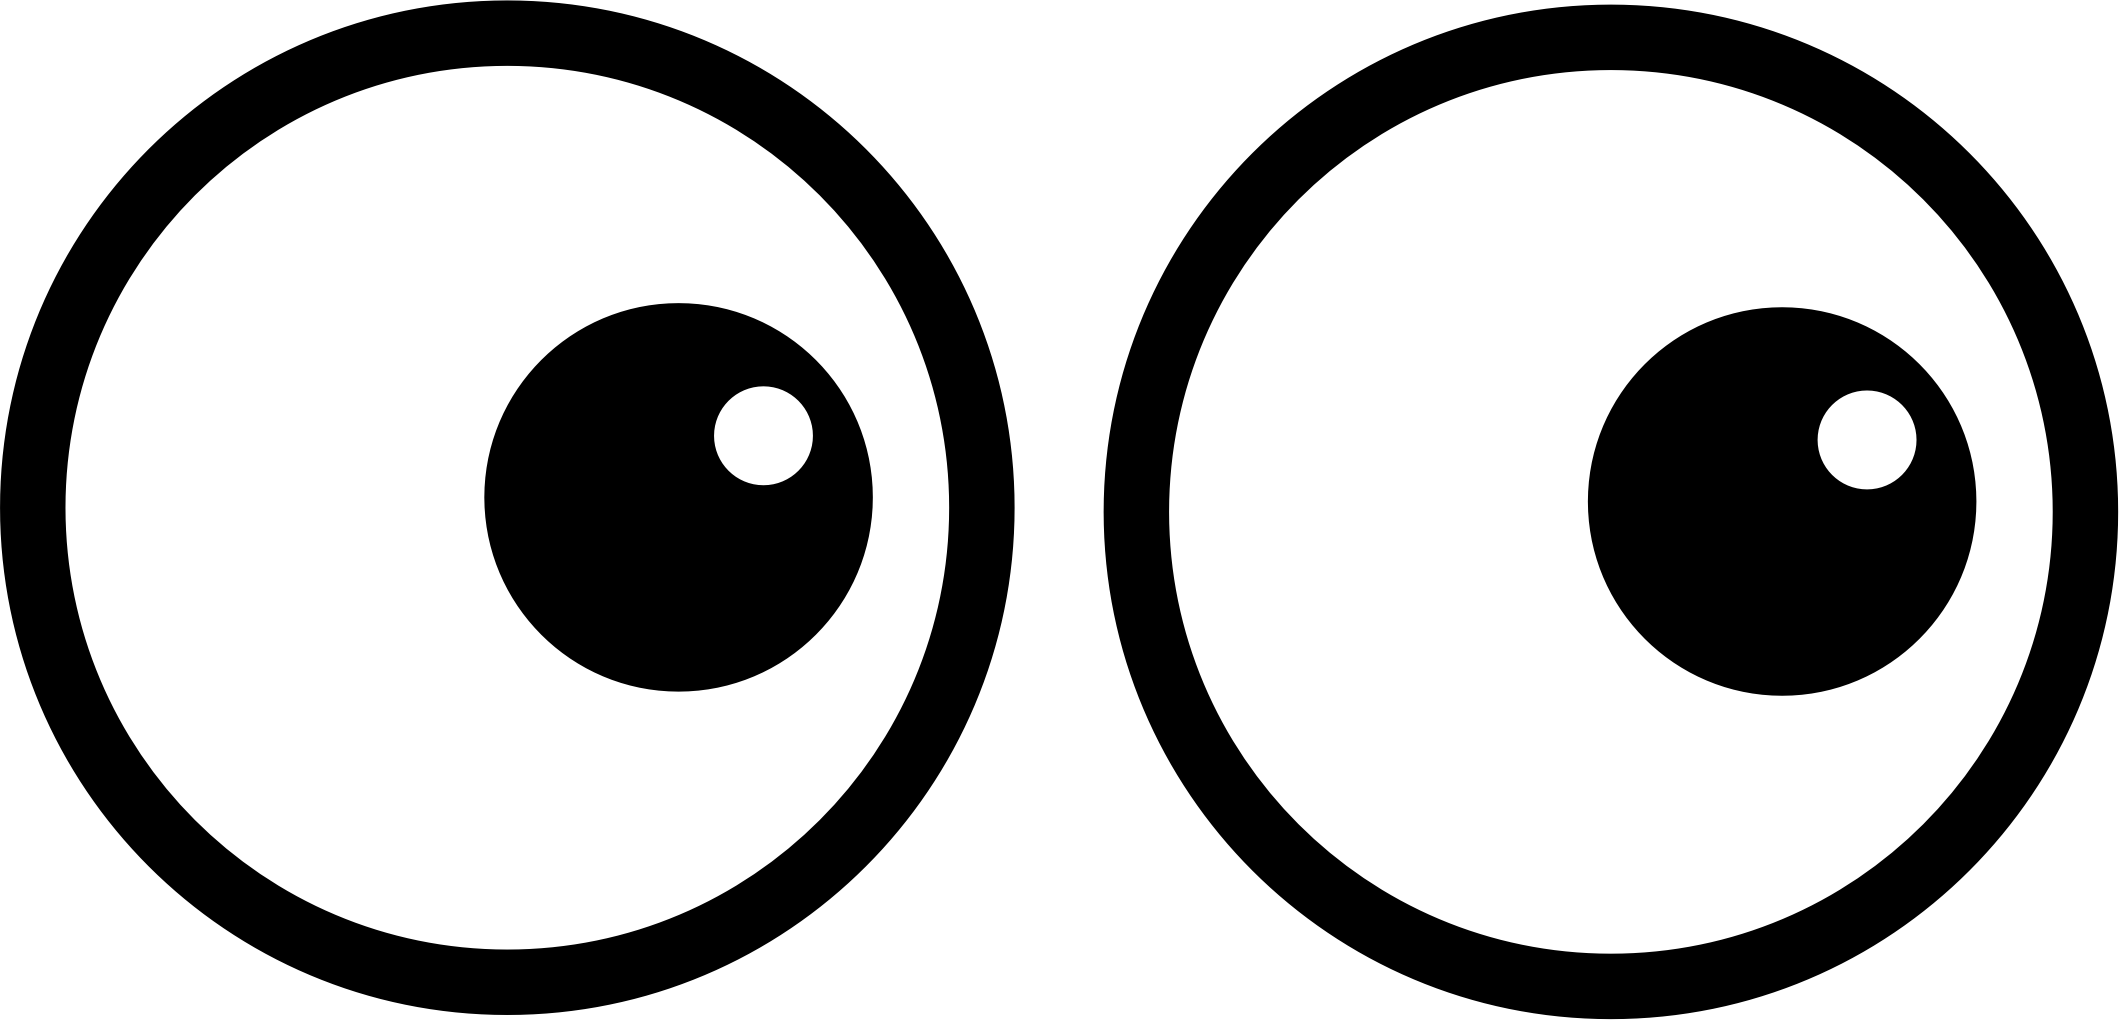 Expression Cartoon Eyes PNG Transparent Picture | PNG Mart